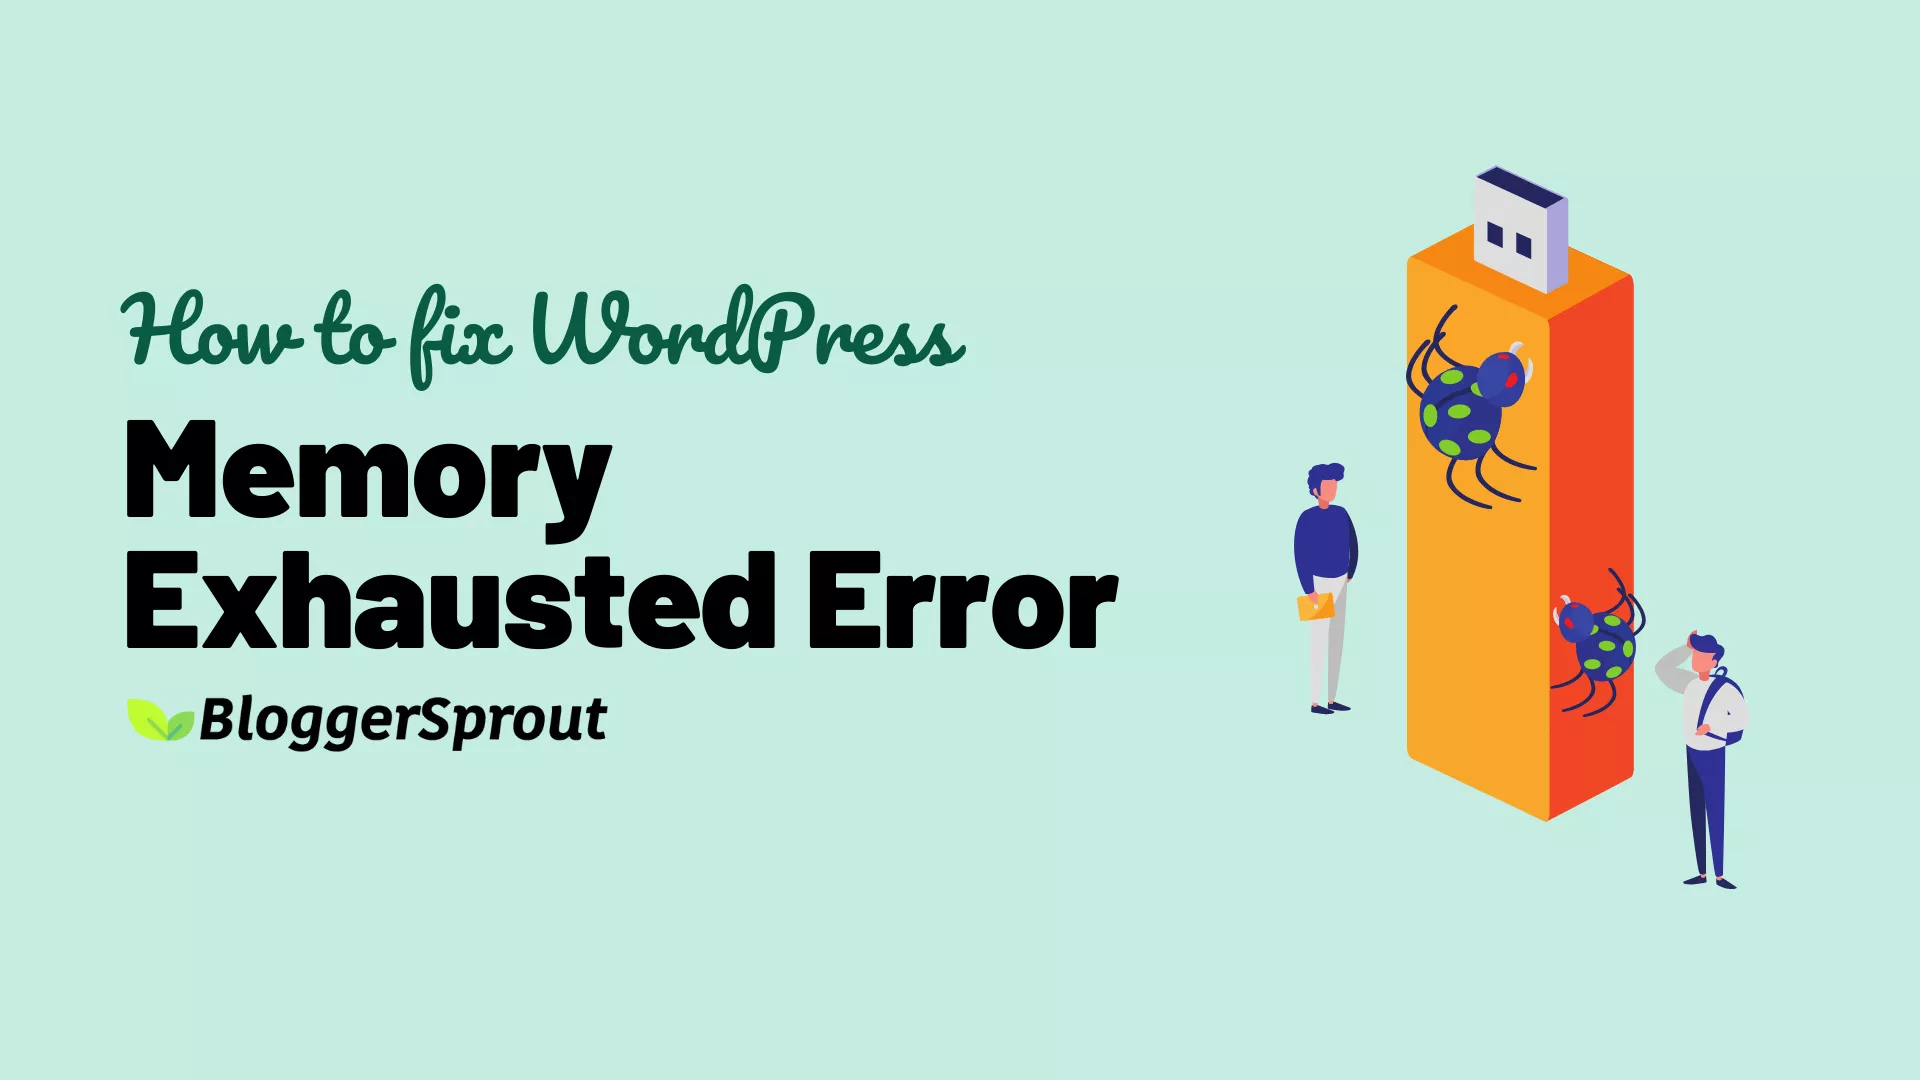 How to Fix WordPress Memory Exhausted Error: Allowed Memory Size